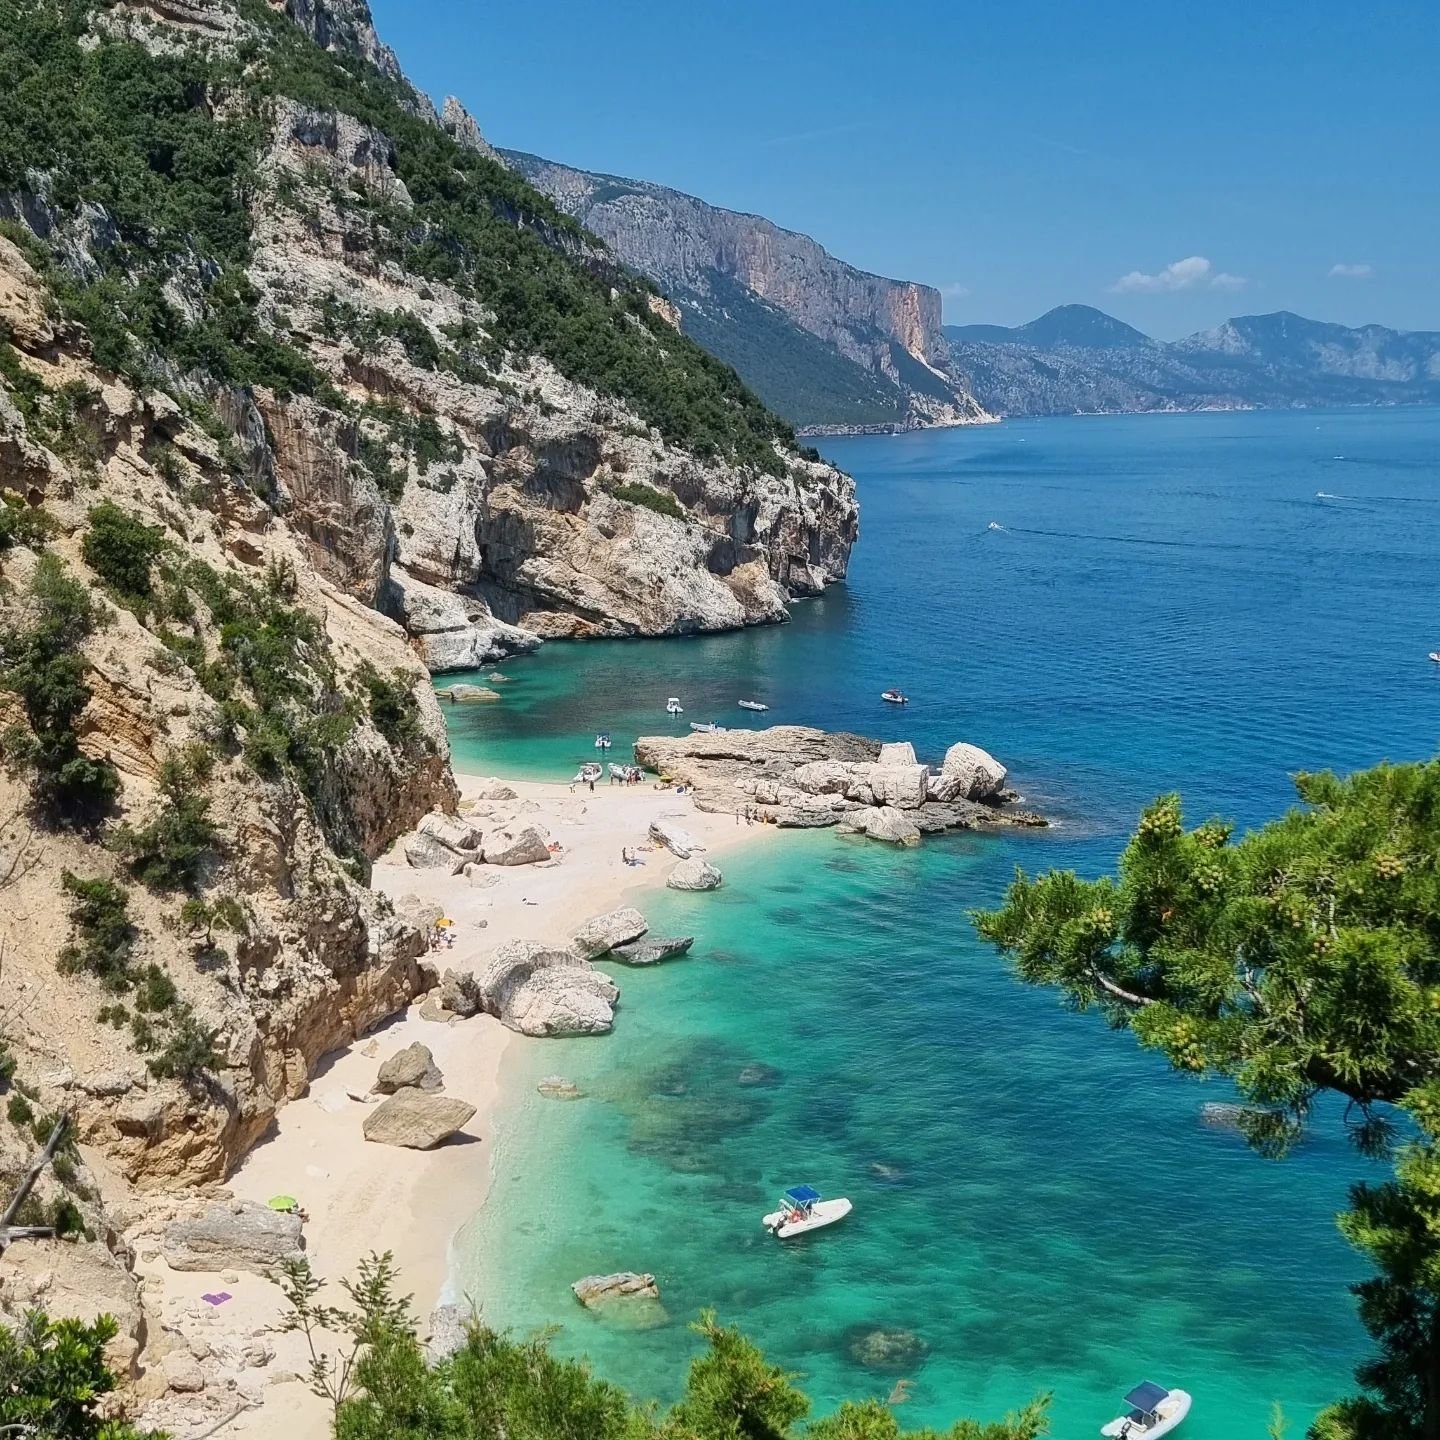 Cala Mariolu is the One! 
Best beach in #Europe and World Top 3! 

We've been there and we can only confirm it! 
Ready to go back there?

#sardiniaadventures #sardinia #sardegna #sardaigne #cerde&ntilde;a #sardinien #hikingadventures #hiking #explore